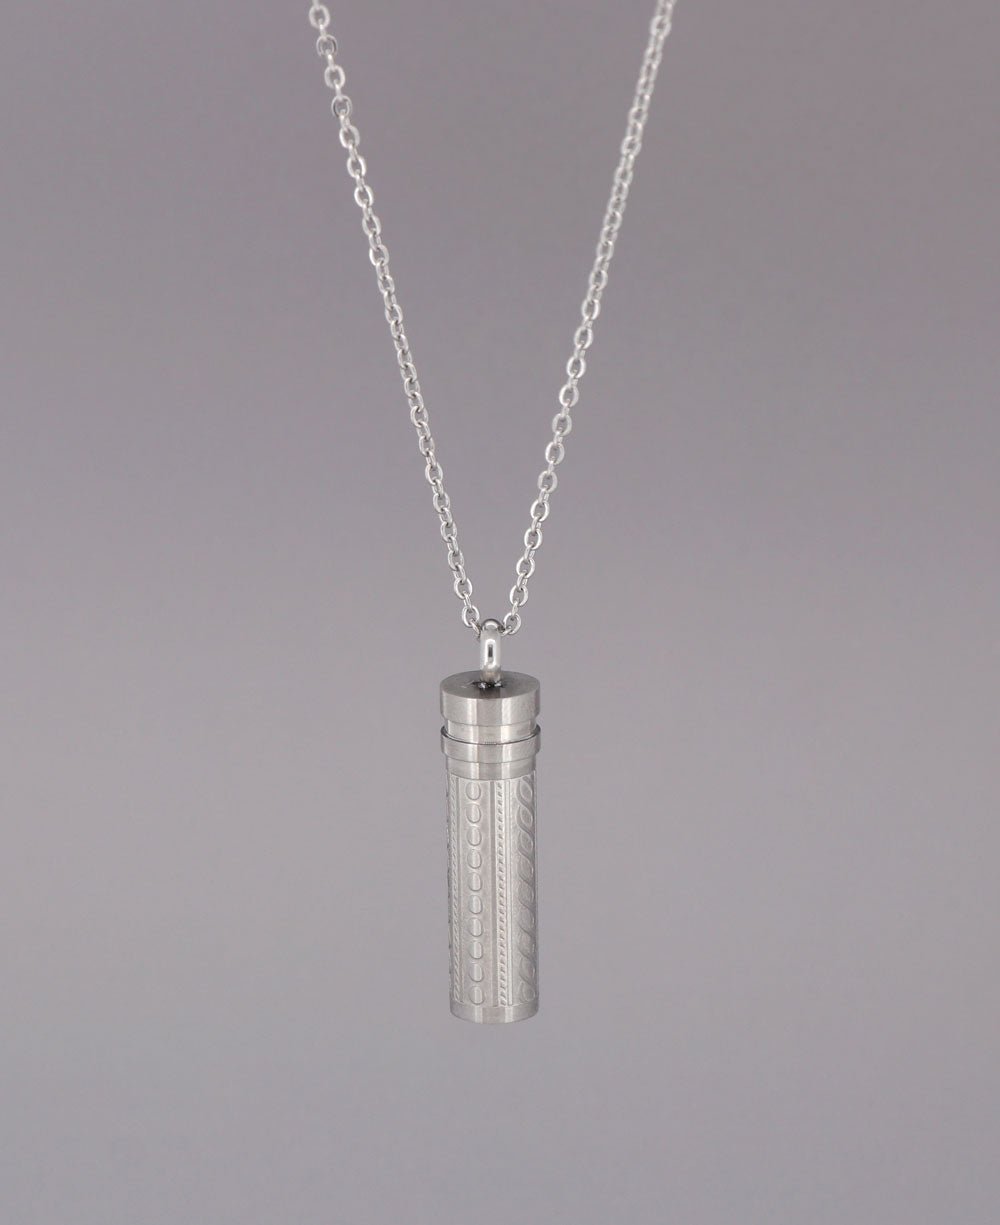 Stainless Steel Vial Pendant Necklace for Keepsakes - Necklaces